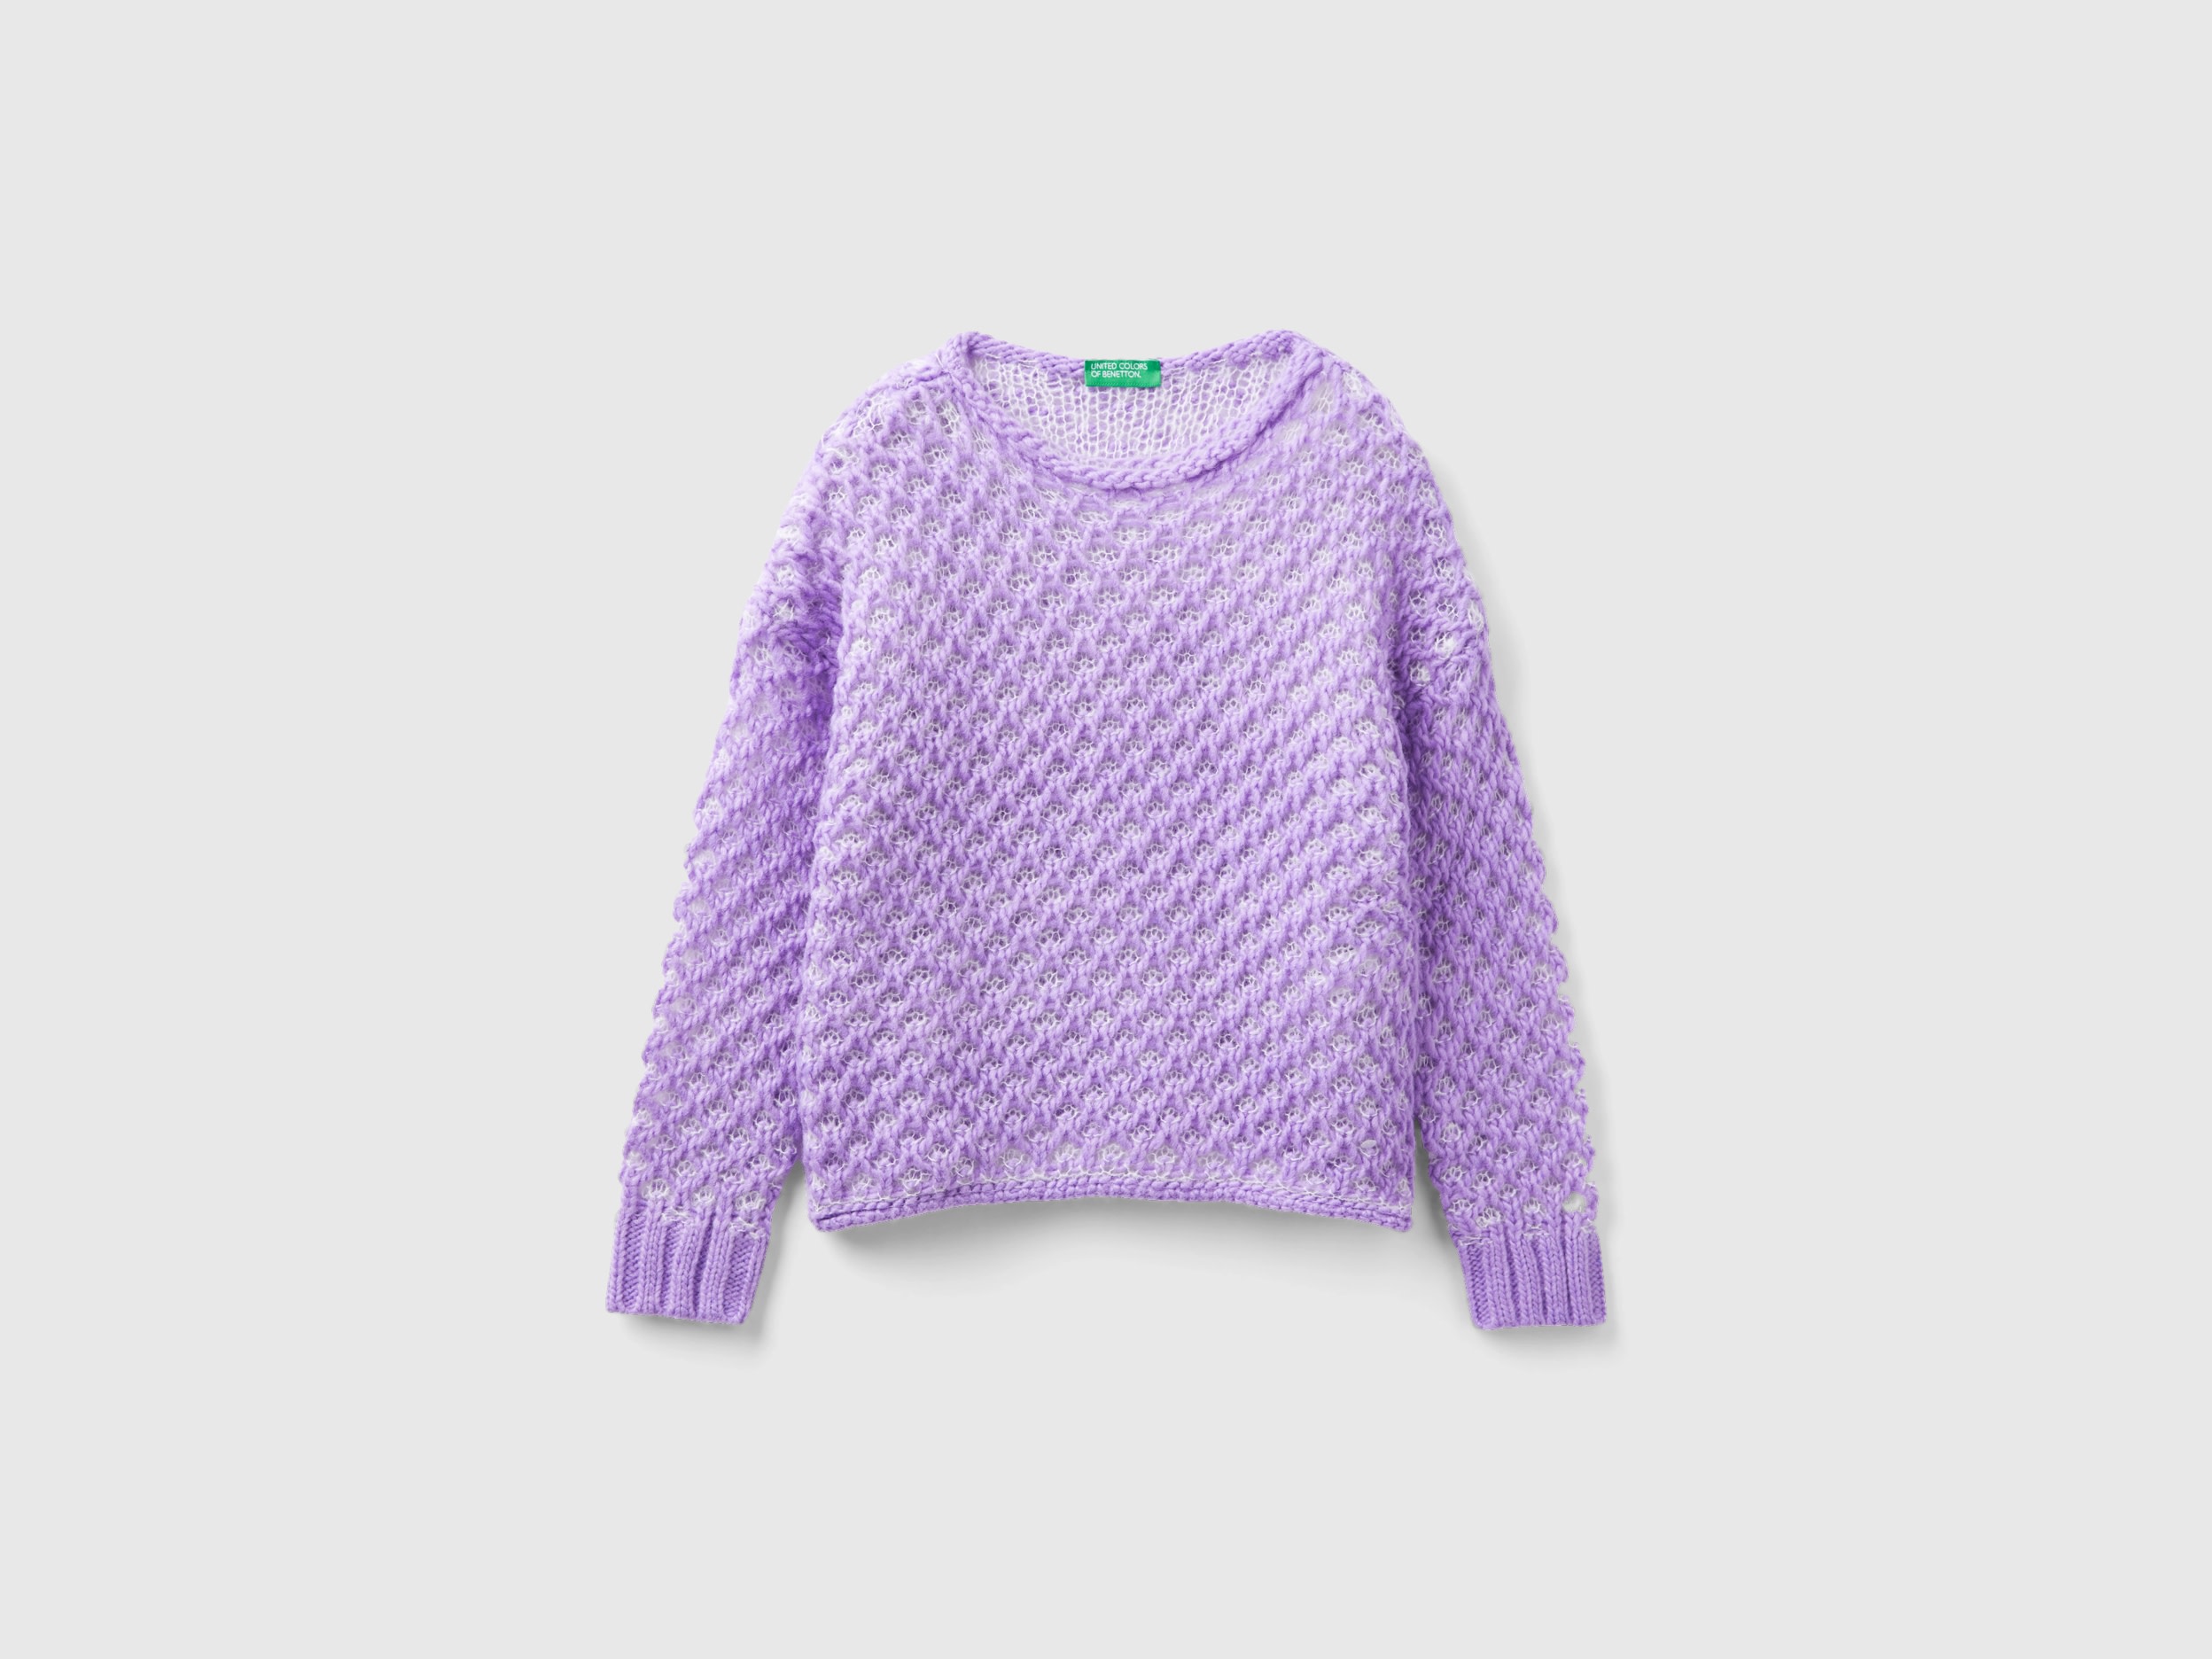 Benetton, Sweater With Jacquard Mesh, size S, Lilac, Kids